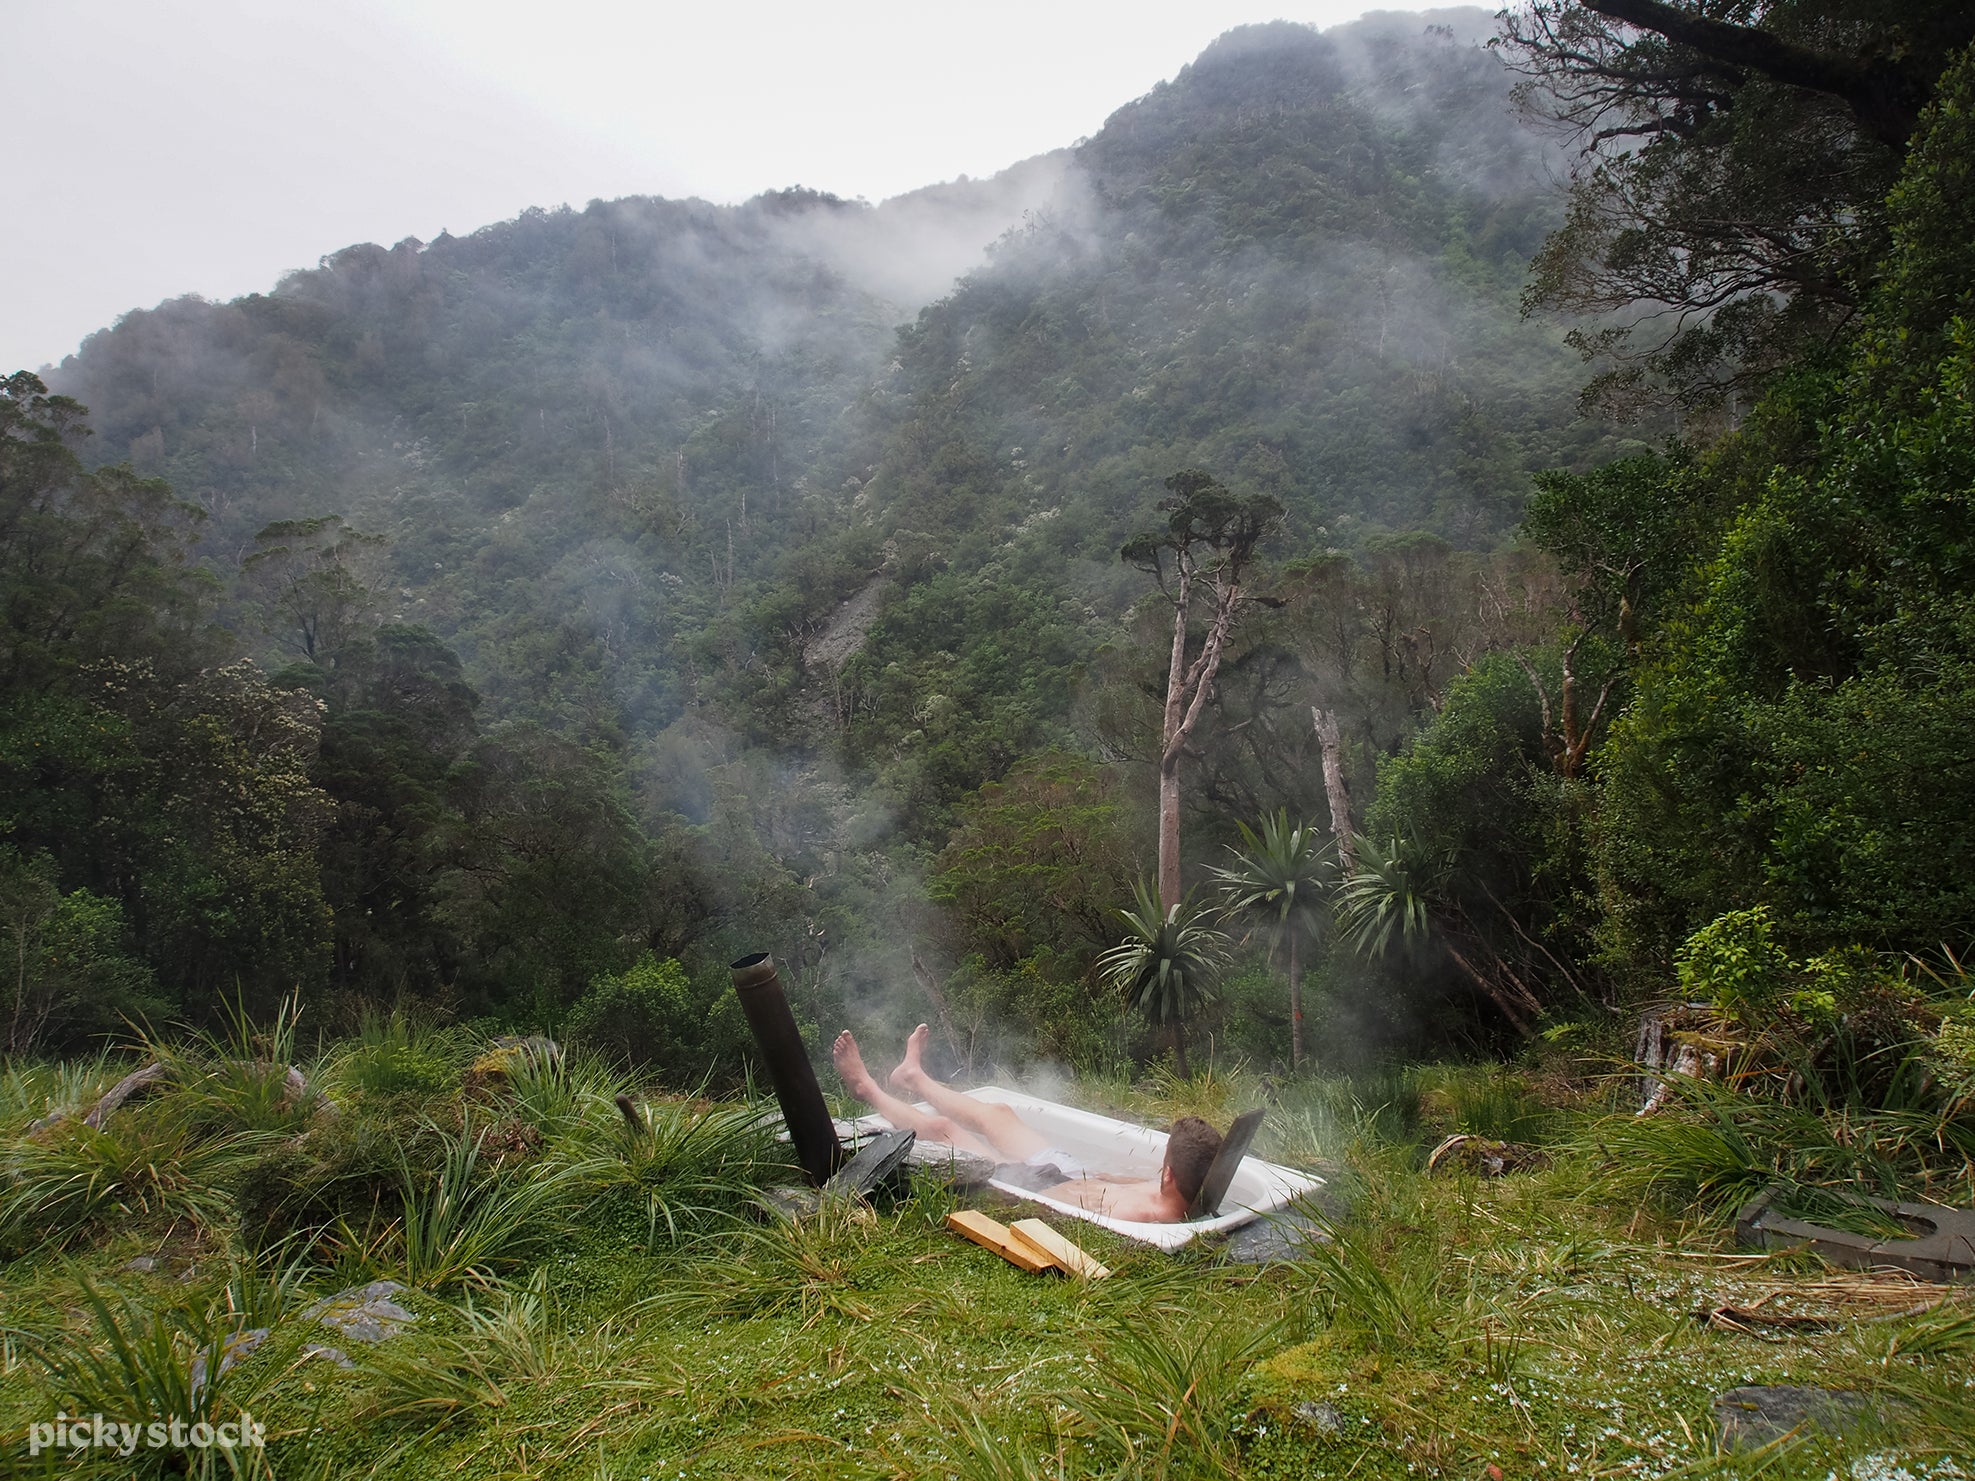 Landscape of a man relaxing in a warm bathtub amidst a lushes green forest. The man stares towards the hills: the languid fog makes the mountains vaporous as fog seeps into the valleys.